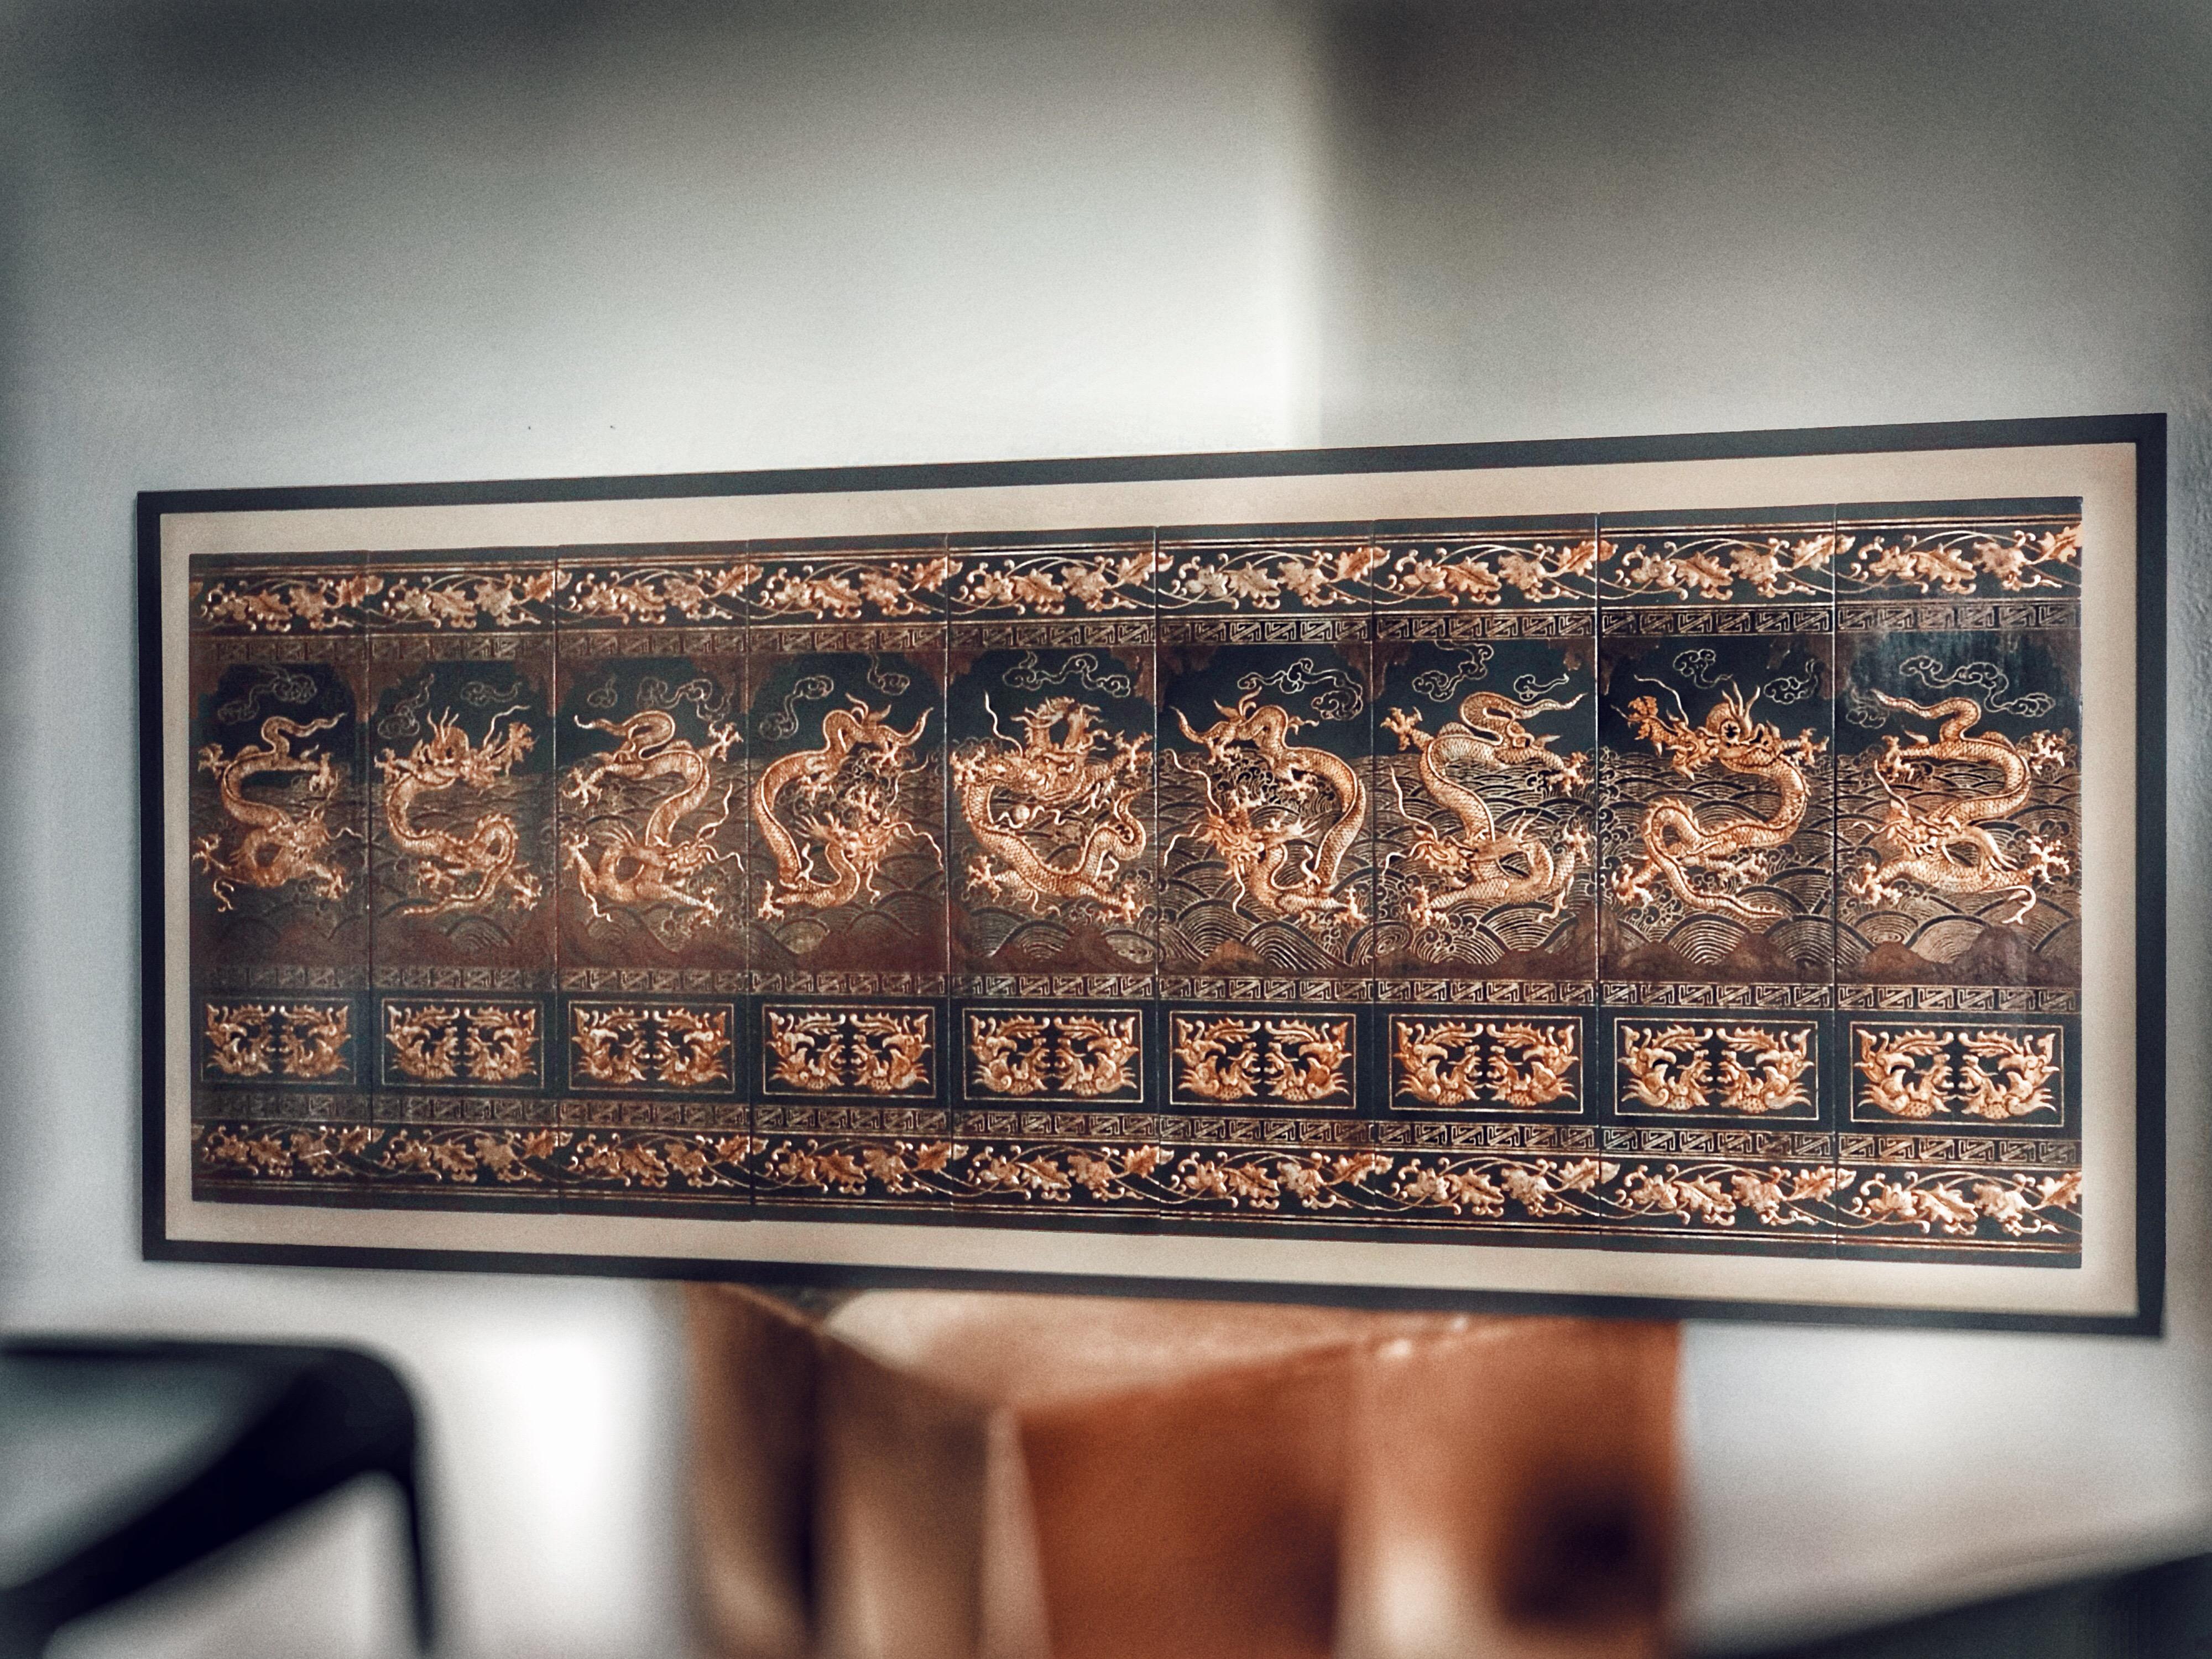 Chinese wall panels were typically made of lacquered and decorated wood, and functioned mostly as decoration, but also as a room divider like the Chinese standing screen. Lacquered wood panels were the original style of screen creation – these